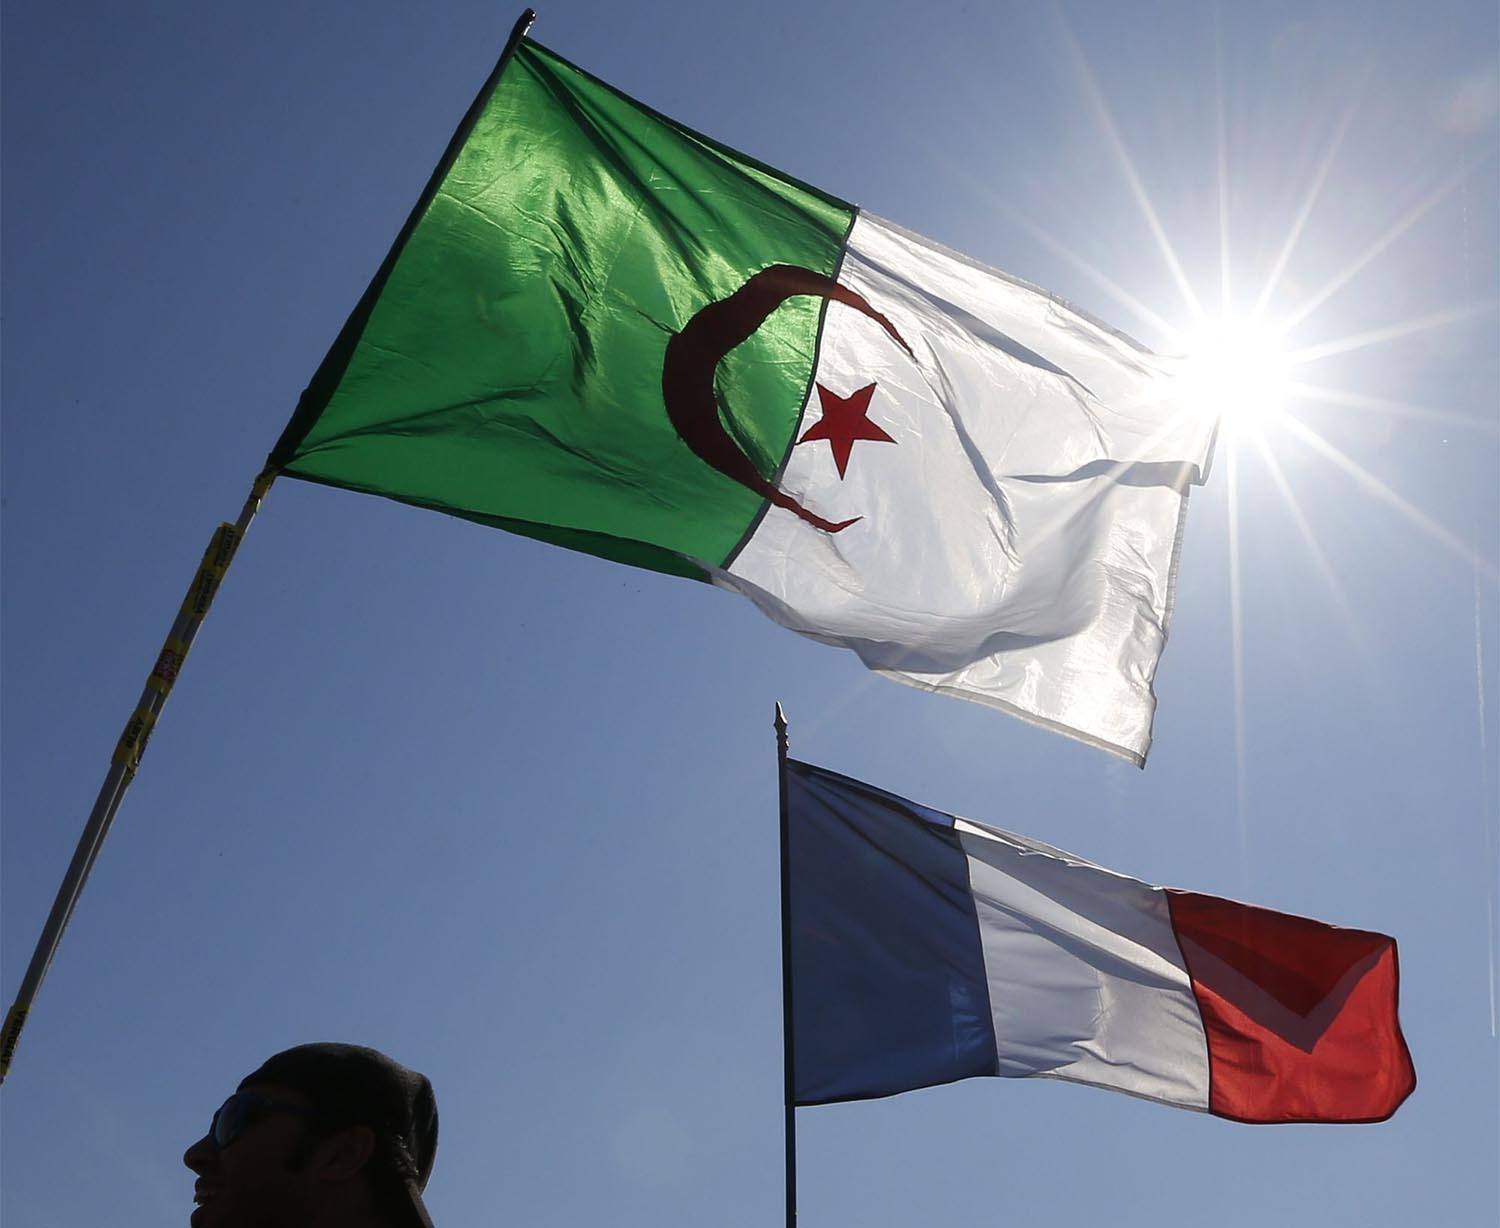 French and Algerian flags